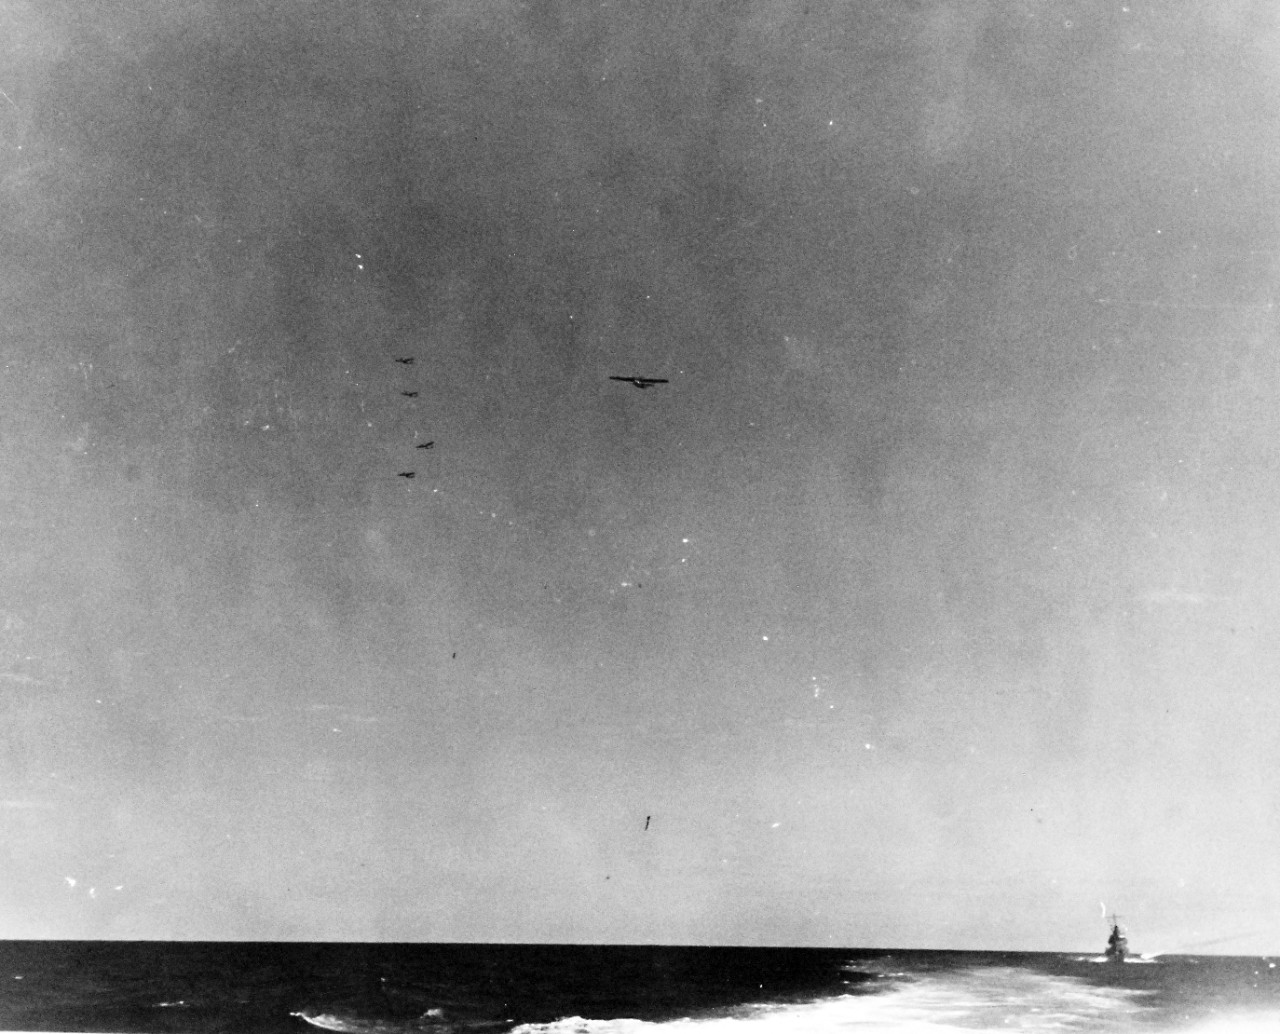 80-G-299831:  Battle of the Eastern Solomons, 24 August 1942.   A patrol plane from USS Enterprise (CV 6) escorted by 4 fighters of Combat Air Patrol flying directly through the formation of attacking Japanese planes.  As seen from USS Portland (CA 33).      Official U.S. Navy Photograph, now in the collections of the National Archives.  (2016/07/05).